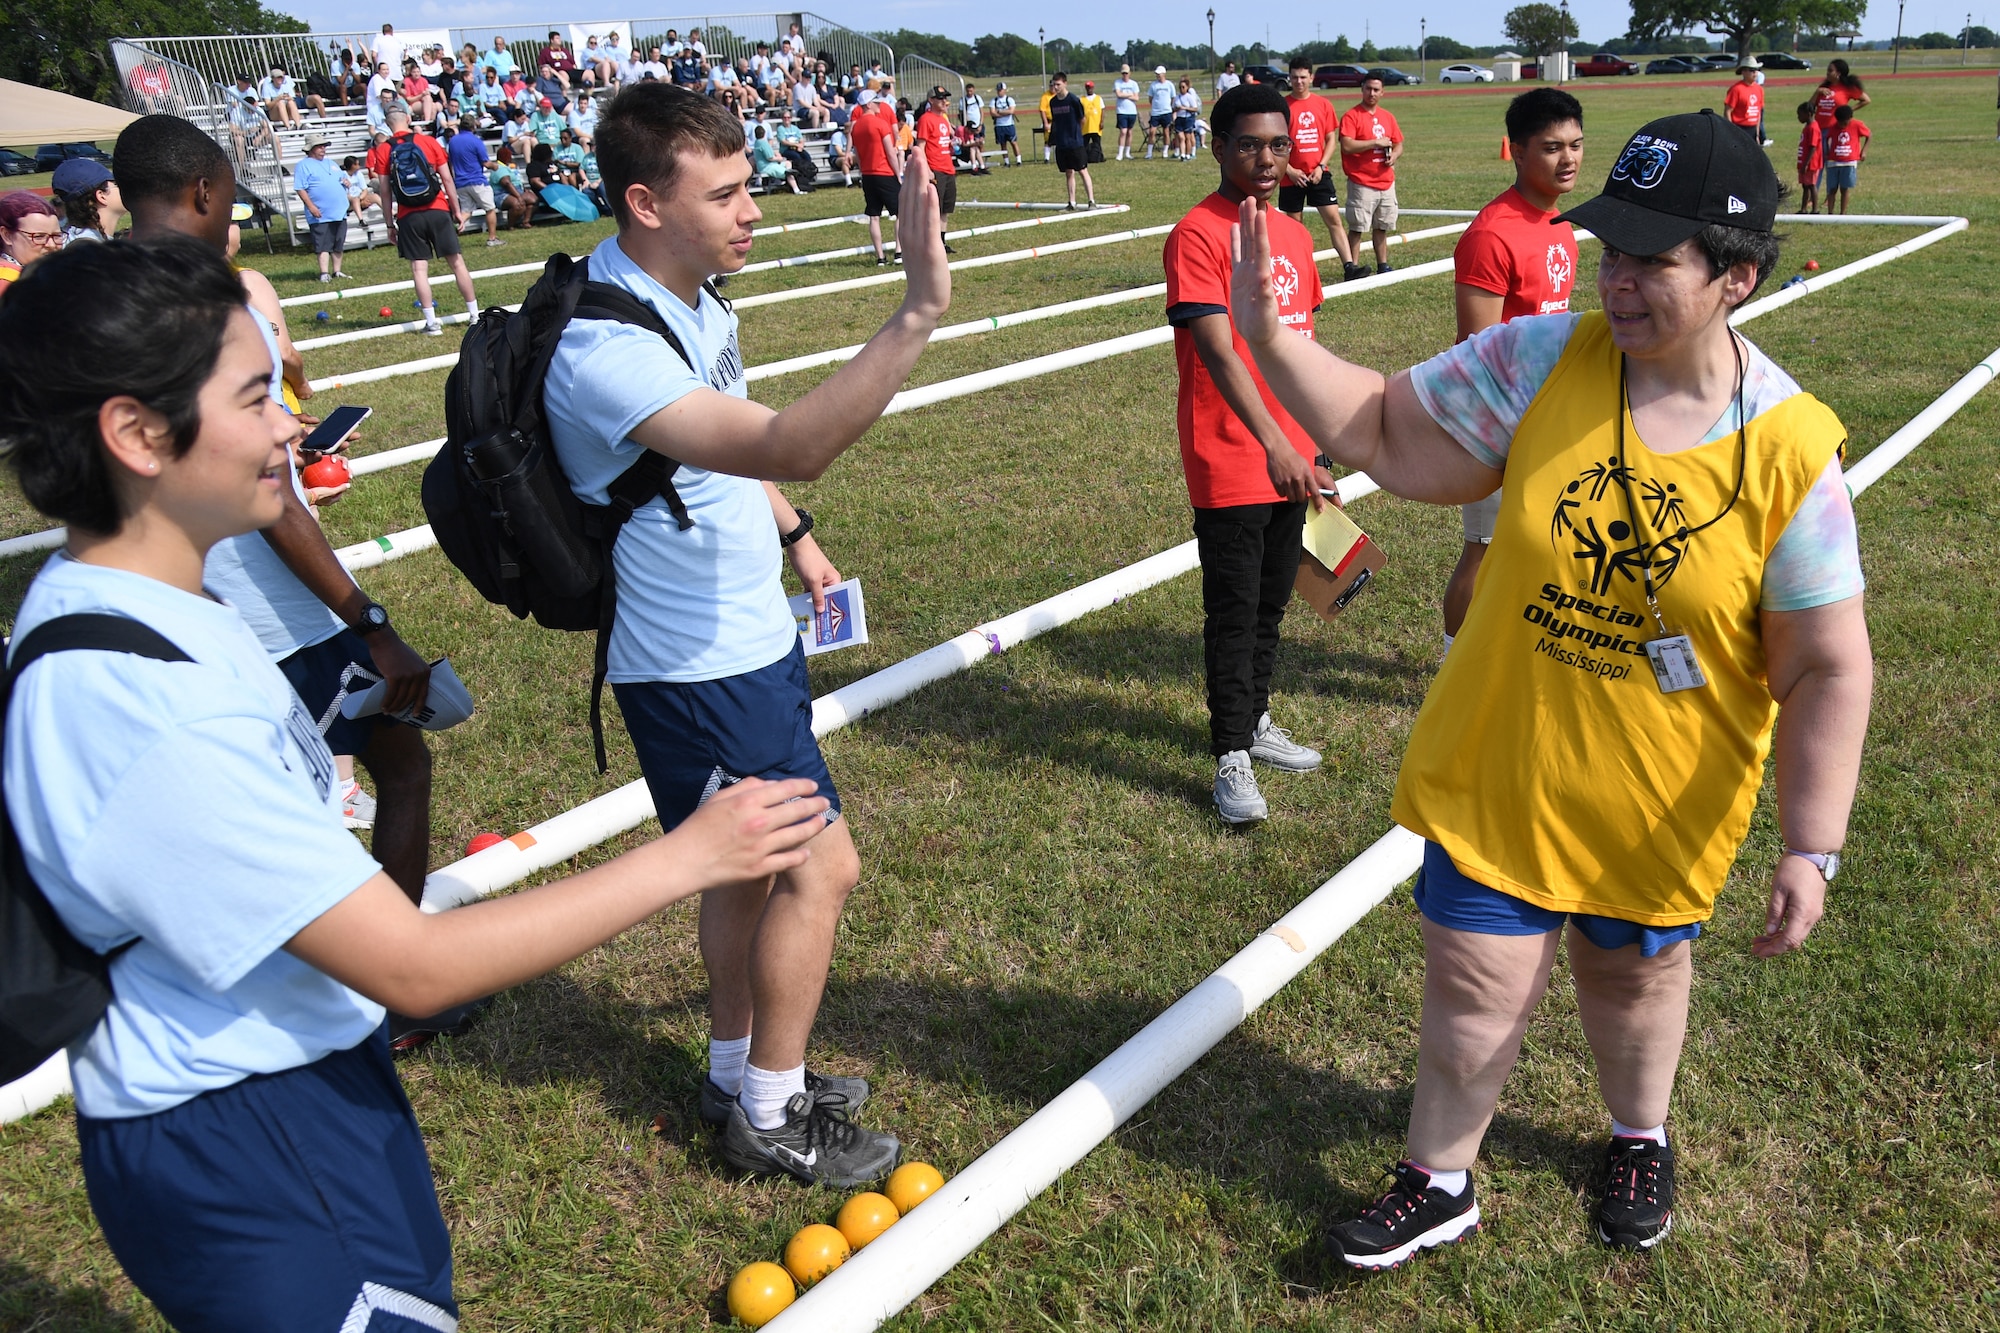 U.S. Air Force Airman Rachel Chi and Airman Basic Parker Ogle, 336th Training Squadron students, high-five Teresa Luna, Area 1 athlete, during the Special Olympics Mississippi Summer Games at Keesler Air Force Base, Miss., May 14, 2022. Over 600 athletes participated in the Summer Games. (U.S. Air Force photo by Kemberly Groue)